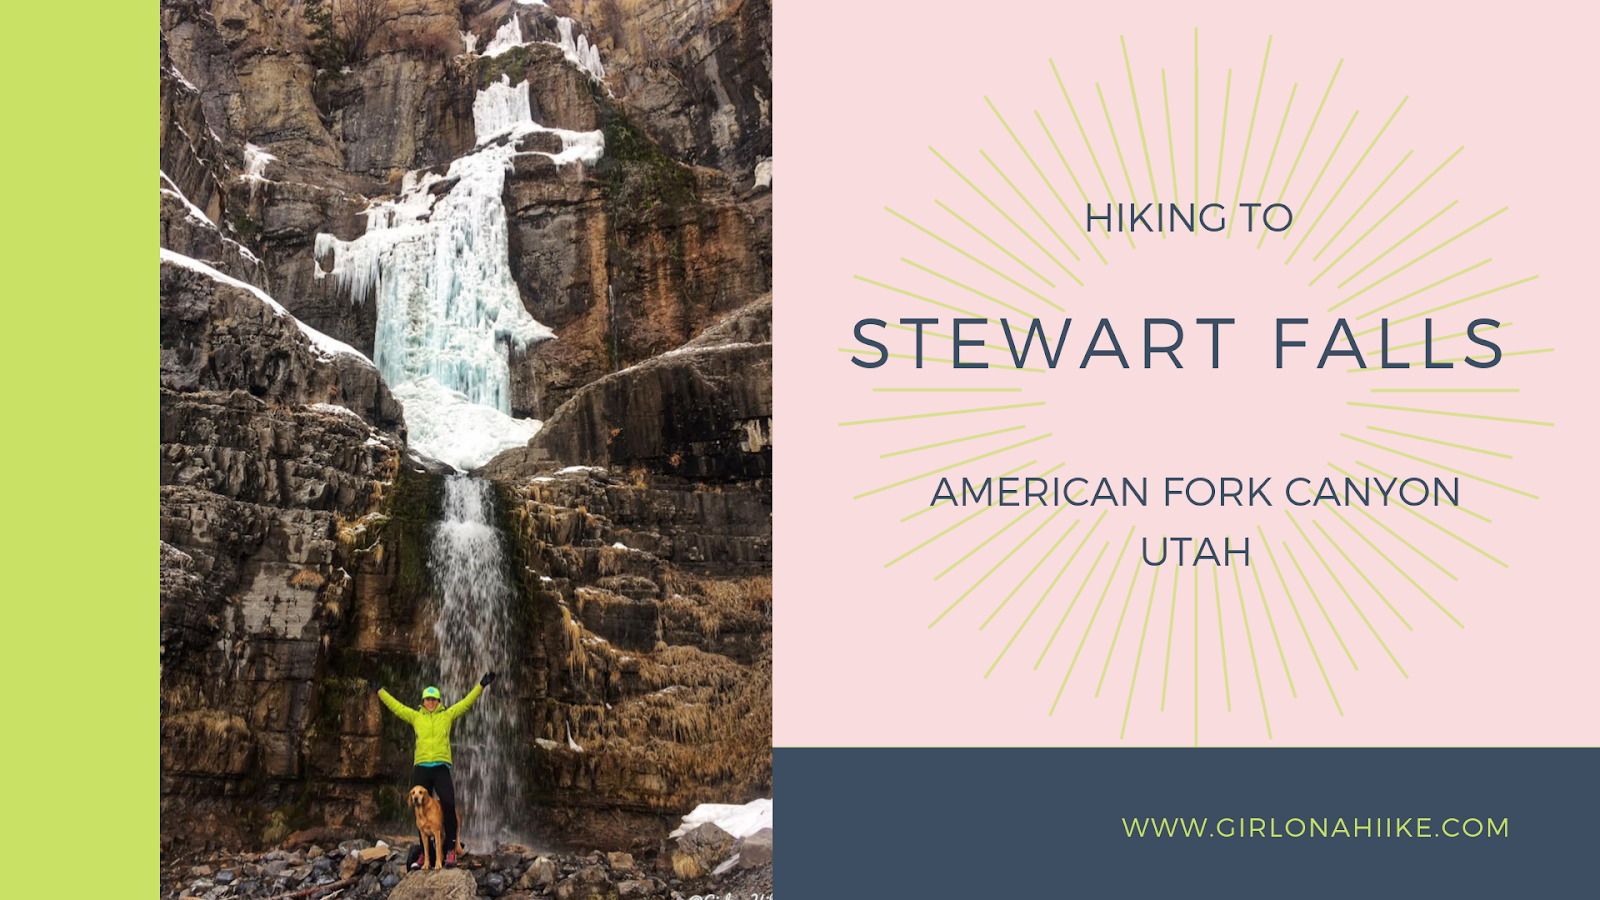 The Top 10 Hikes in American Fork Canyon, American fork canyon best hikes and trails, best views in American fork canyon, Stewart Falls trail